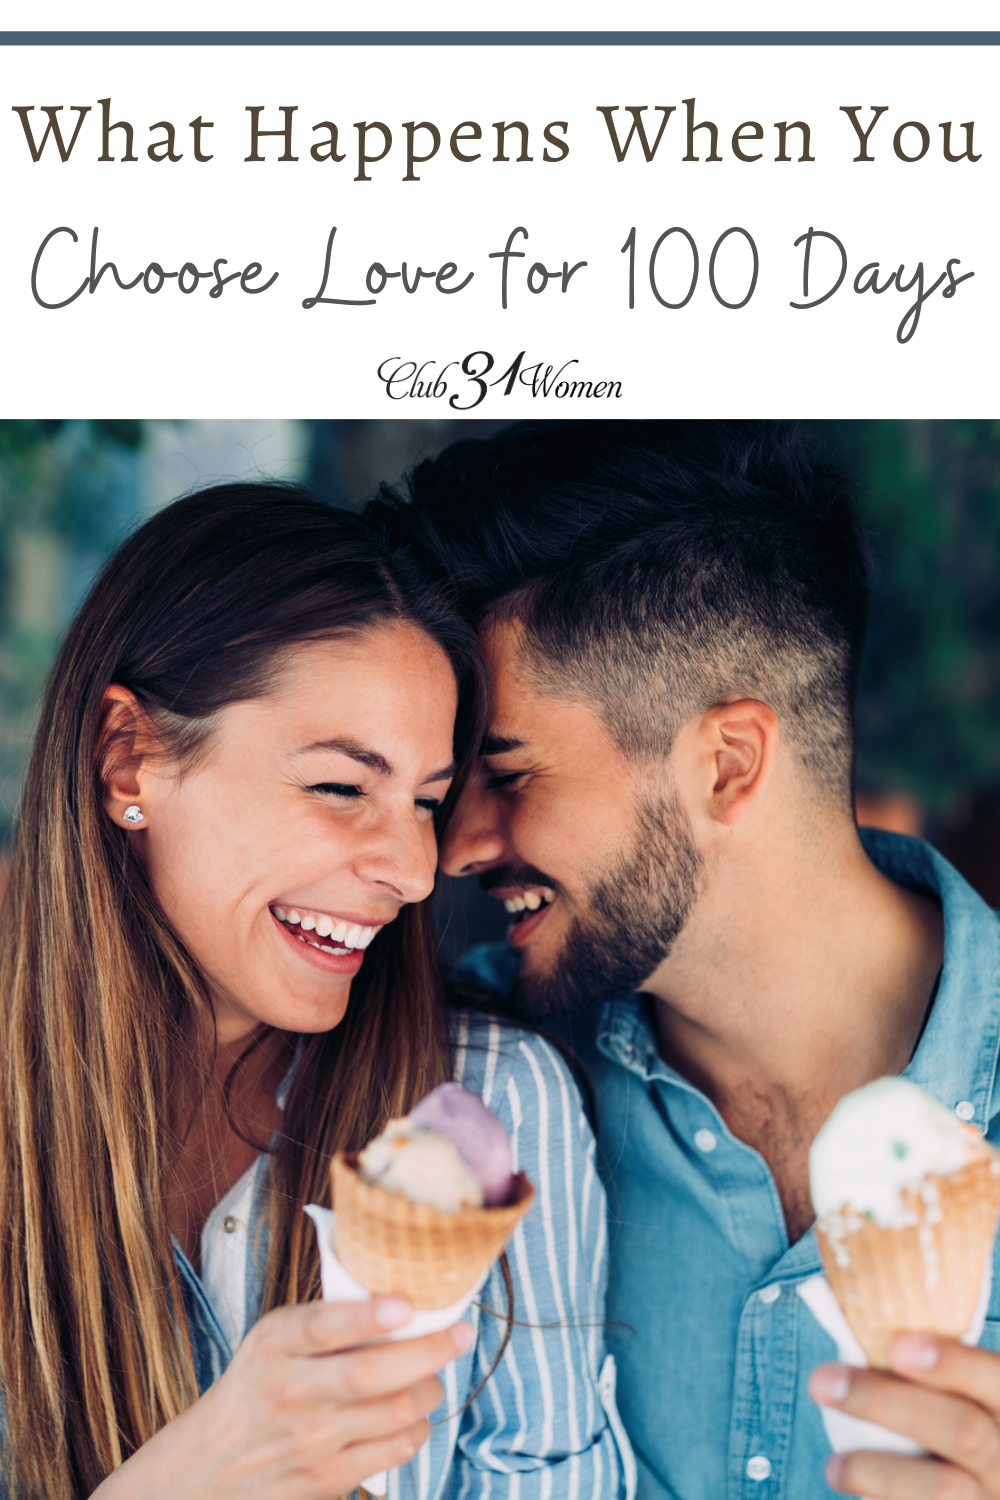 It is too easy to go through the motions and fail to be intentional in your marriage. What if you were to choose love for 100 days? via @Club31Women